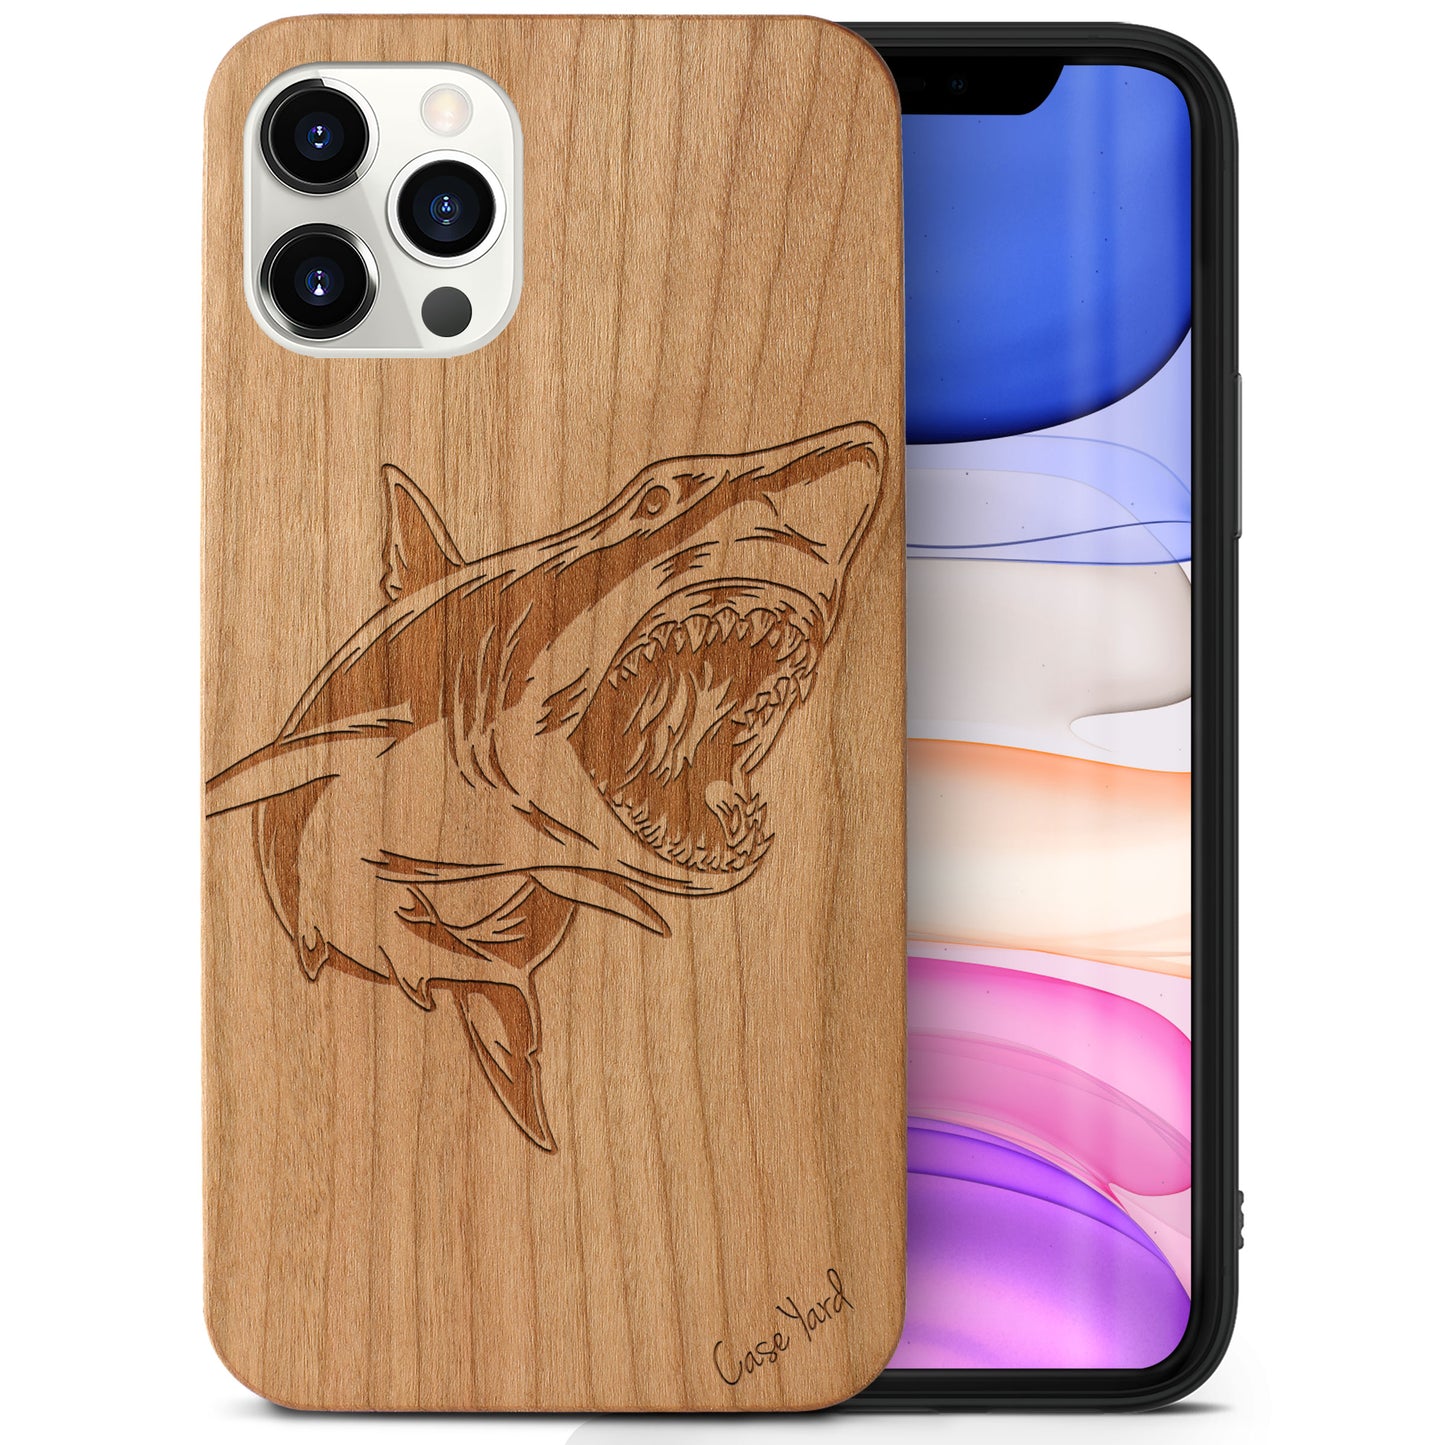 Wooden Cell Phone Case Cover, Laser Engraved case for iPhone & Samsung phone Shark Case Design